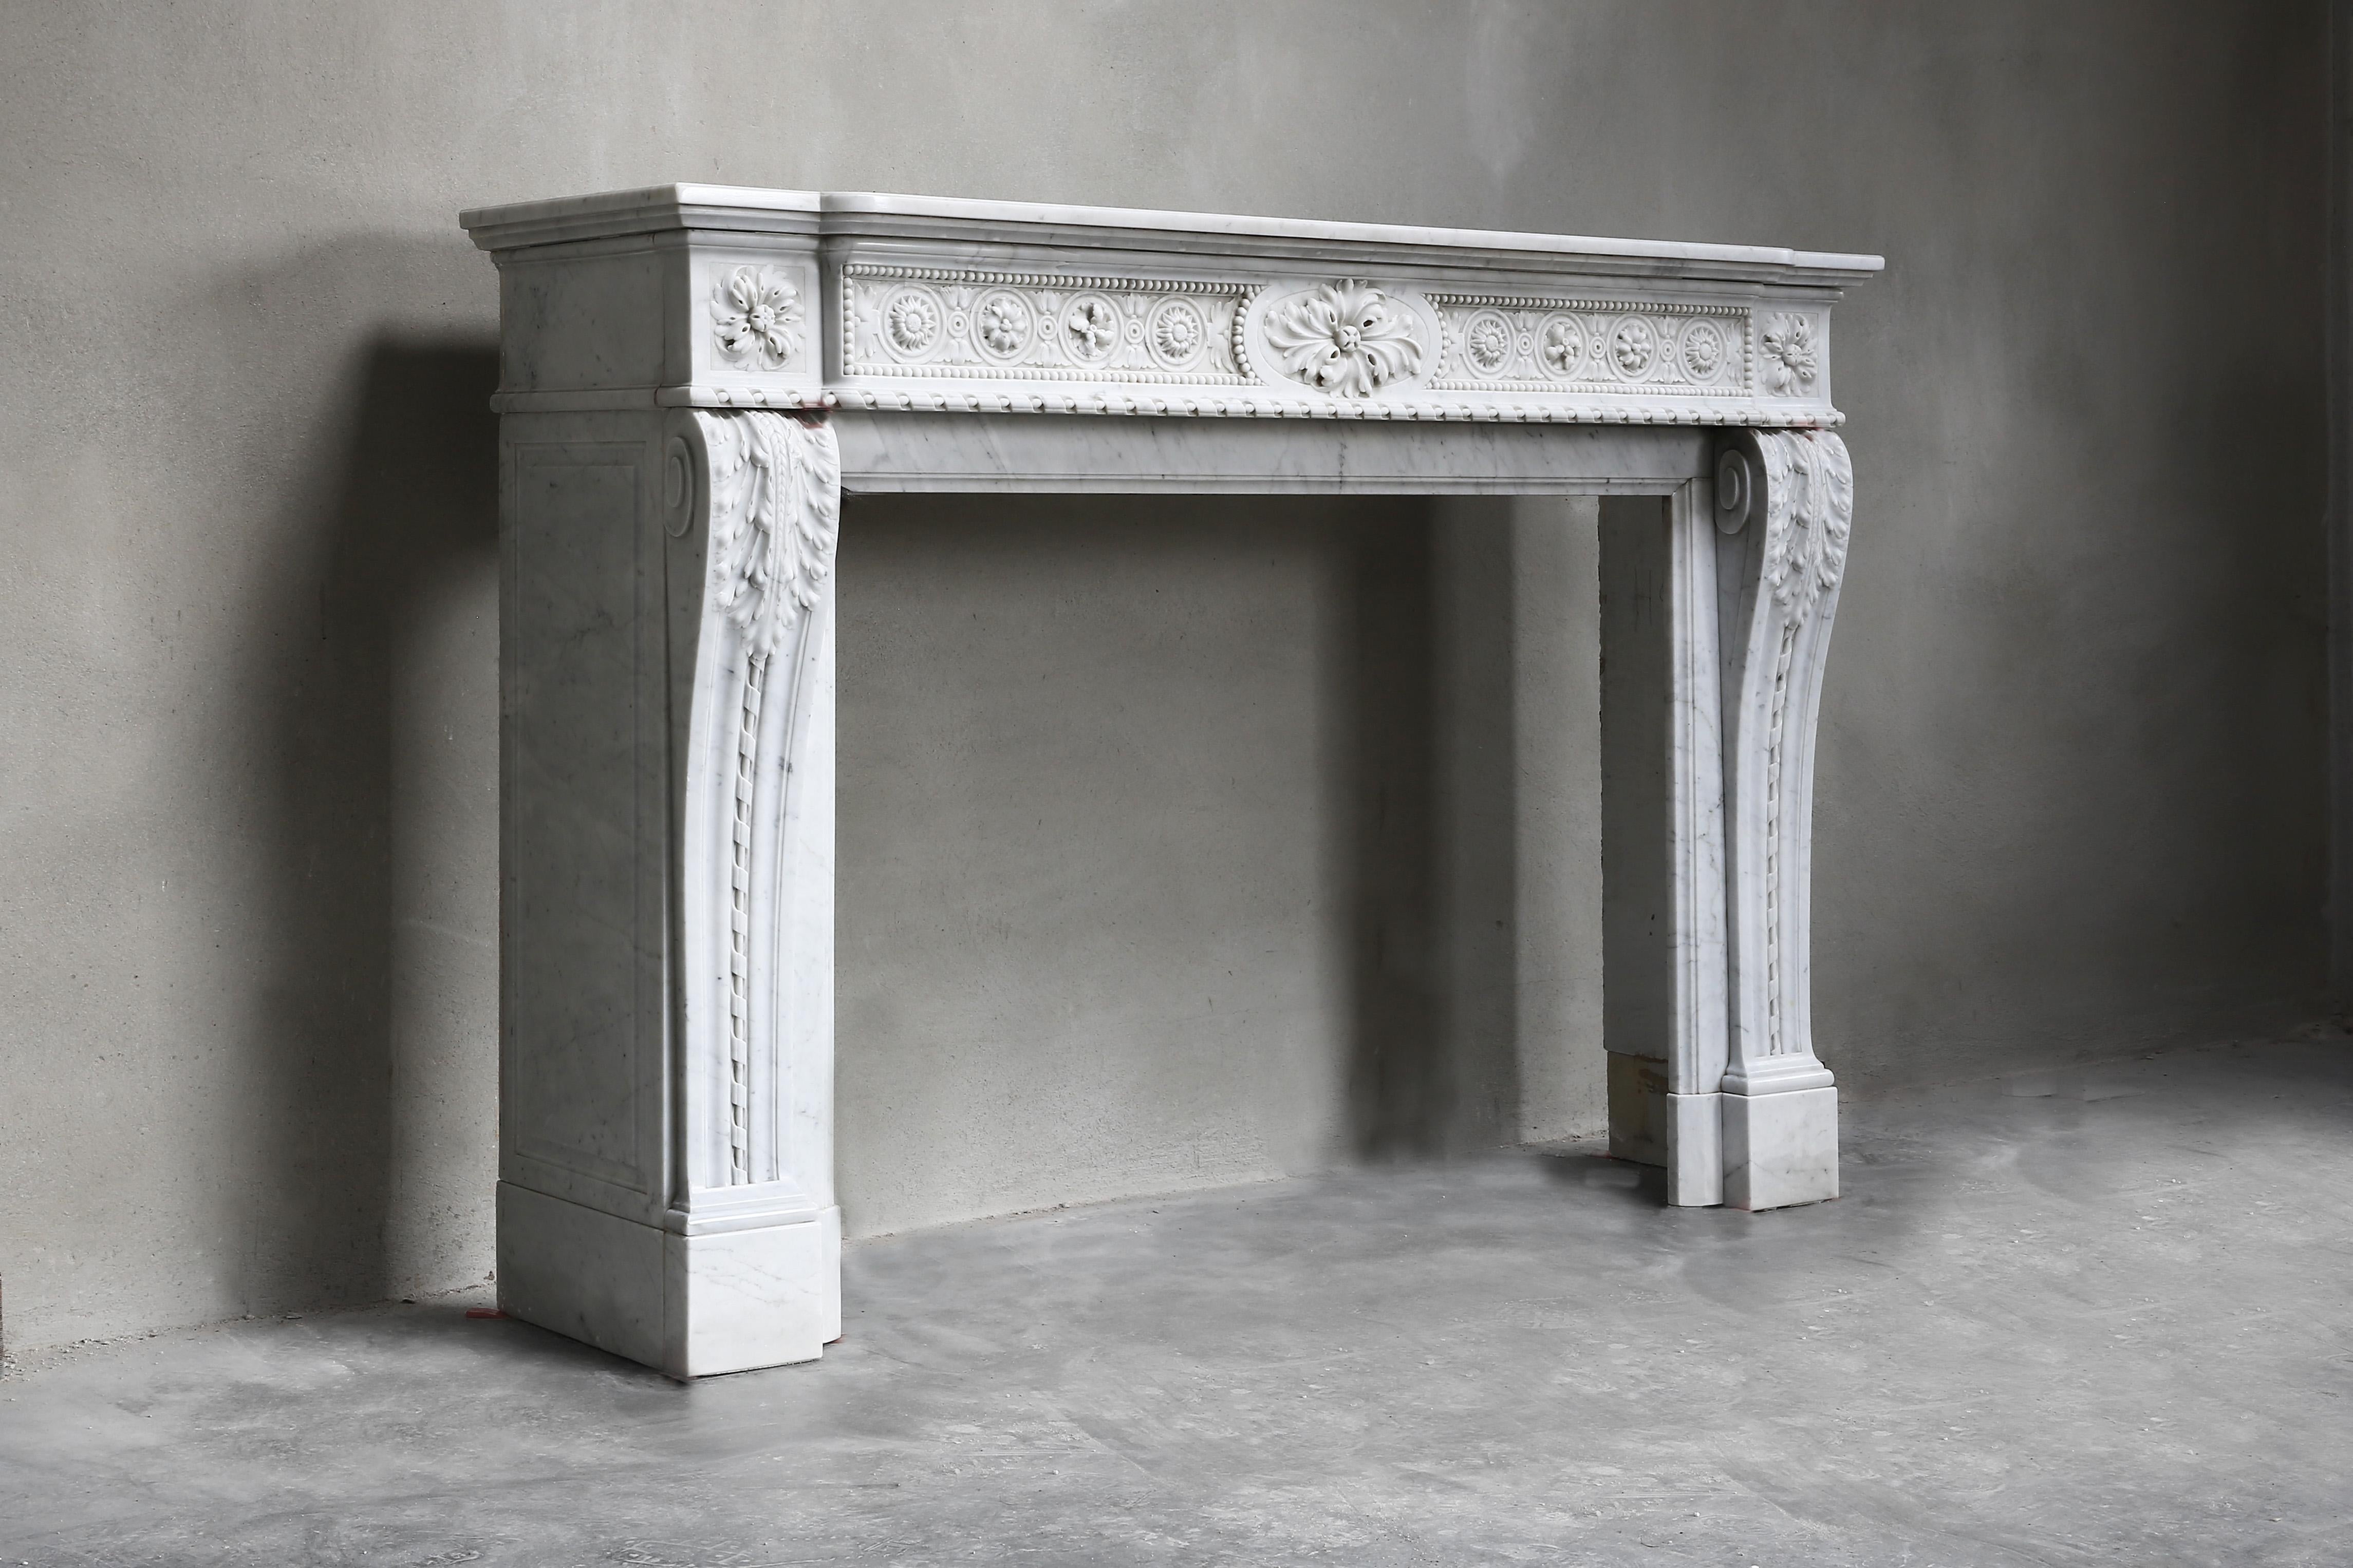 Other Antique Unique Fireplace of Carrara Marble from the 18th Century For Sale